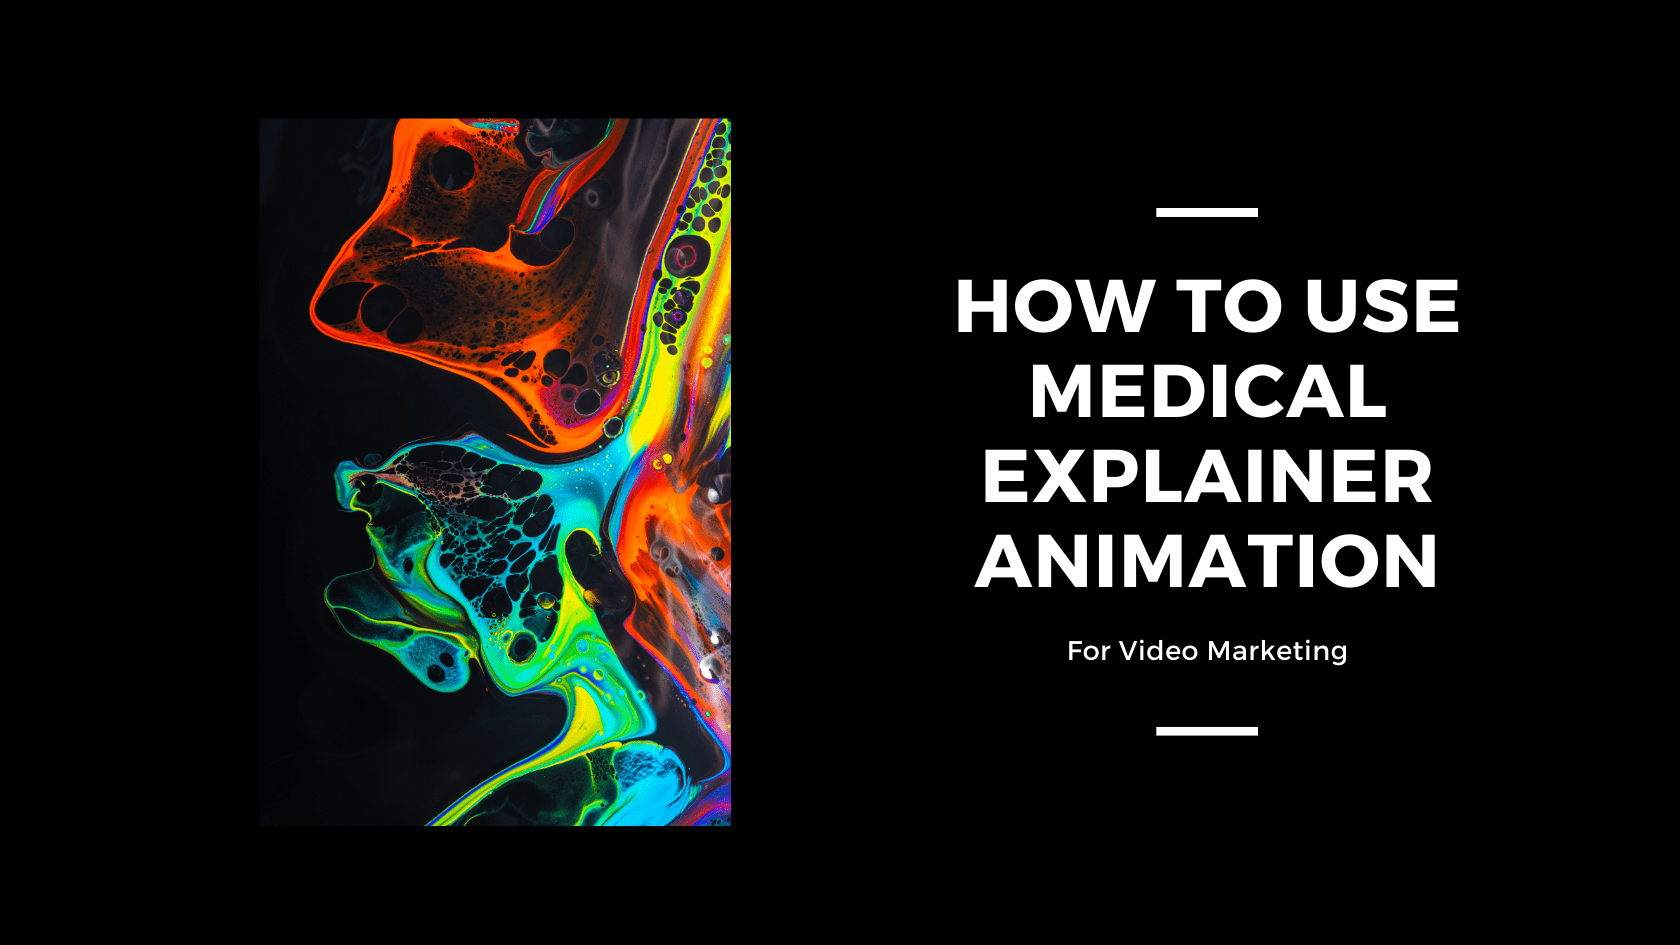 How to use medical explainer animation